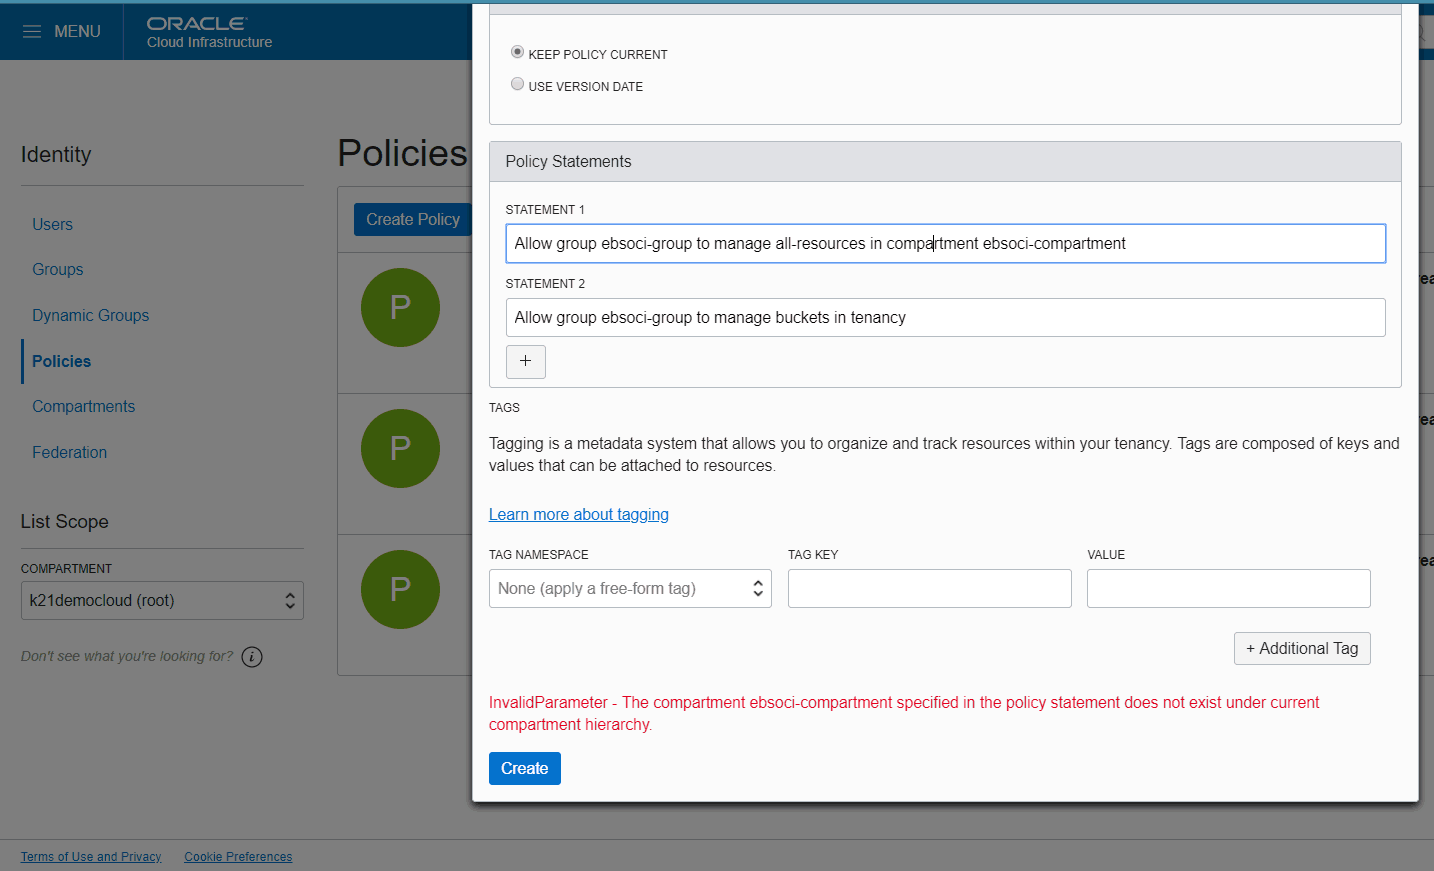 Invalid Parameter Error in Policy